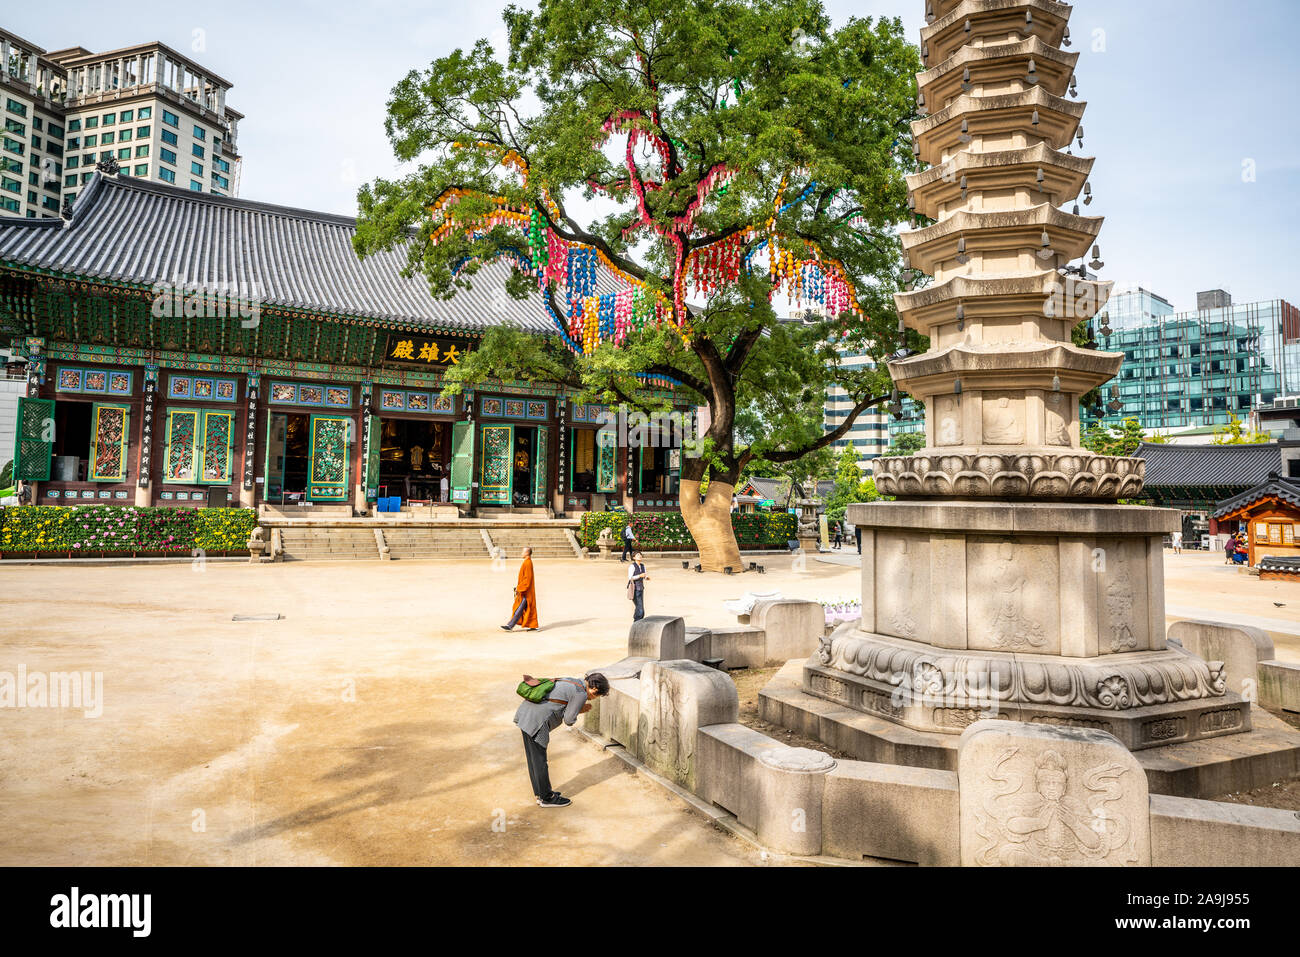 Seoul Korea , 25 September 2019 : Jogyesa temple view with the Daeungjeon hall the pagoda tree and people praying in Seoul South Korea Stock Photo